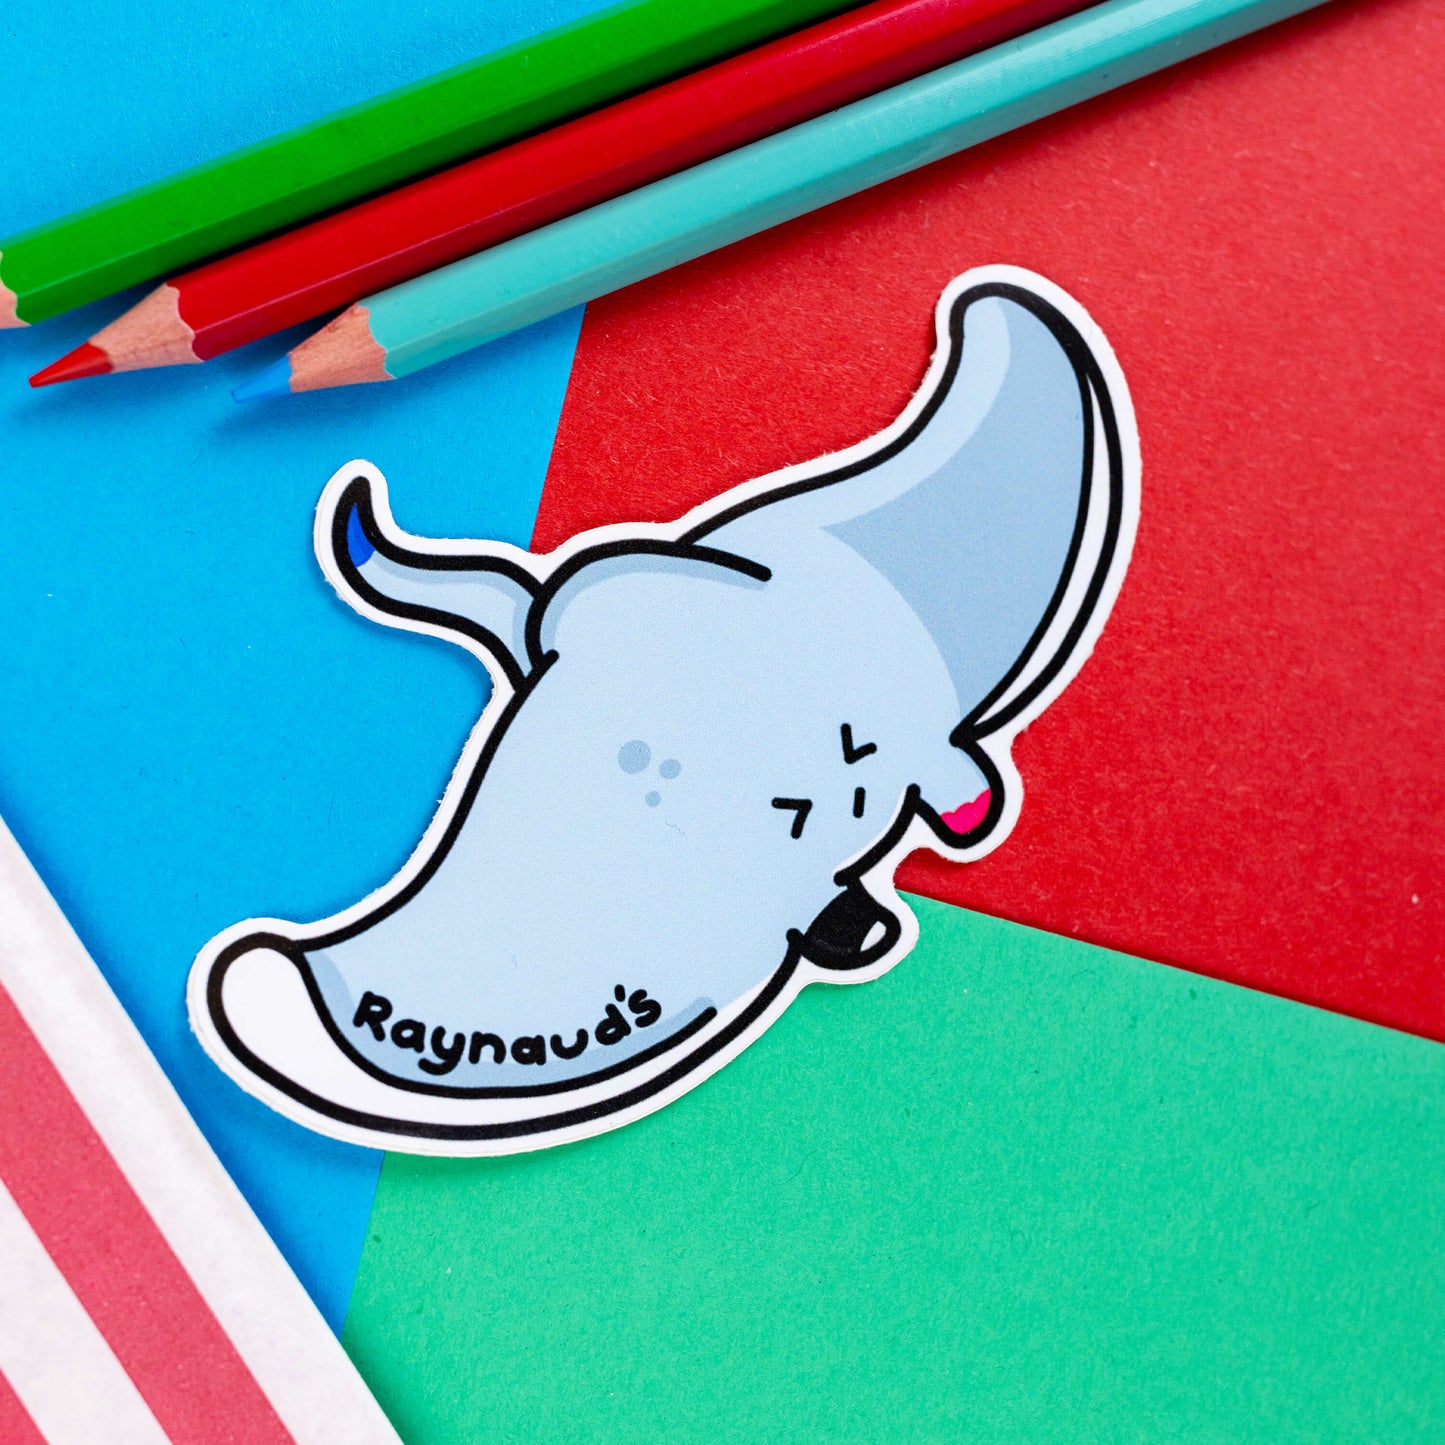 The Raynaud's Sting Ray Sticker on a red, blue and green background with colouring pencils and red stripe candy bag. The pastel blue grey stingray sticker has a scrunched sad face with red patches and black text across its wing reading 'raynaud's'. The hand drawn design is raising awareness for Raynaud's disease.